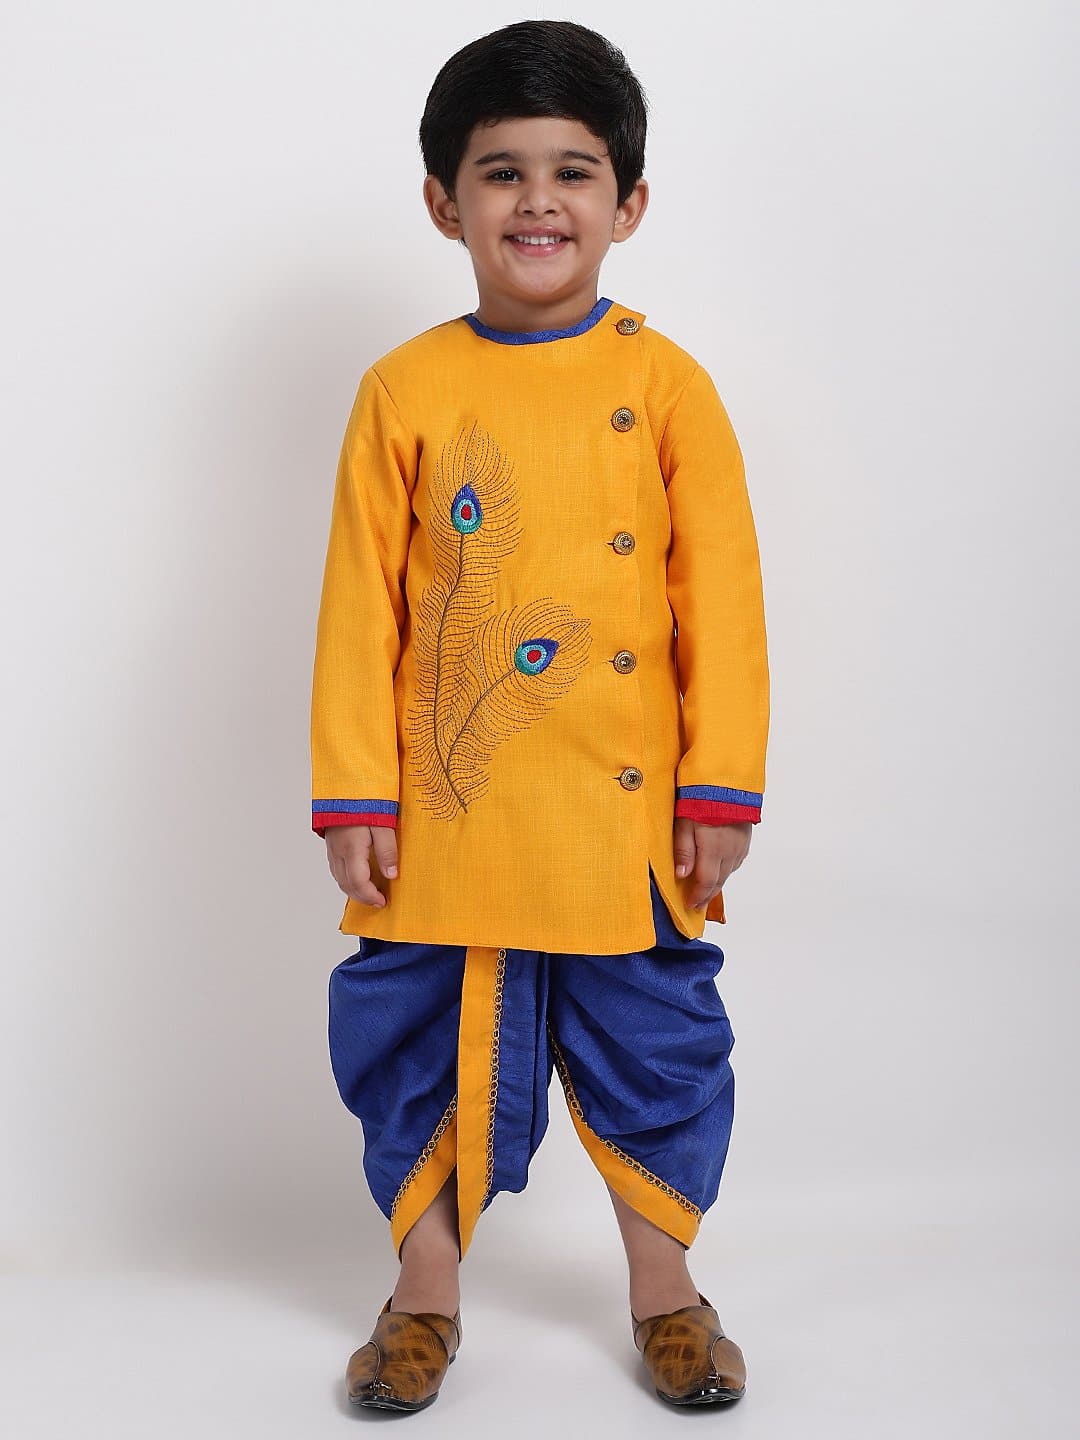 BENAVJI Yellow Color Krishan Costume Dress for kids Baby Boy's & Girls With  Ornament Size 3-6 Months : Amazon.in: Clothing & Accessories